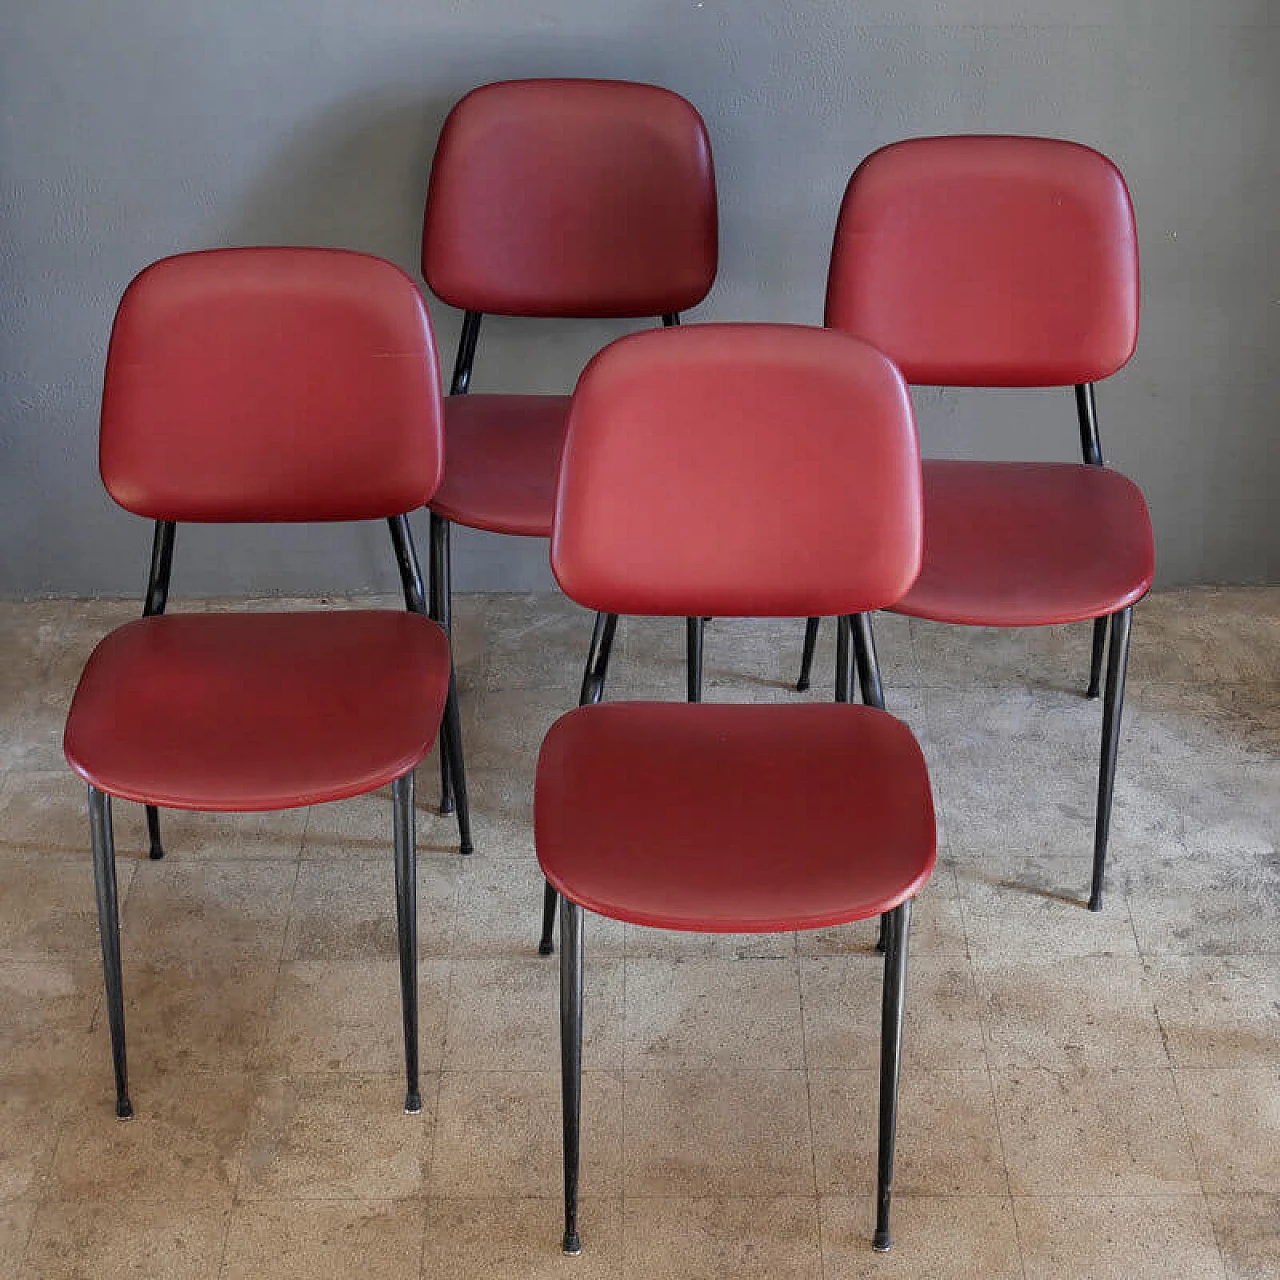 Theatre chairs from the 60s, eco-leather seat 3